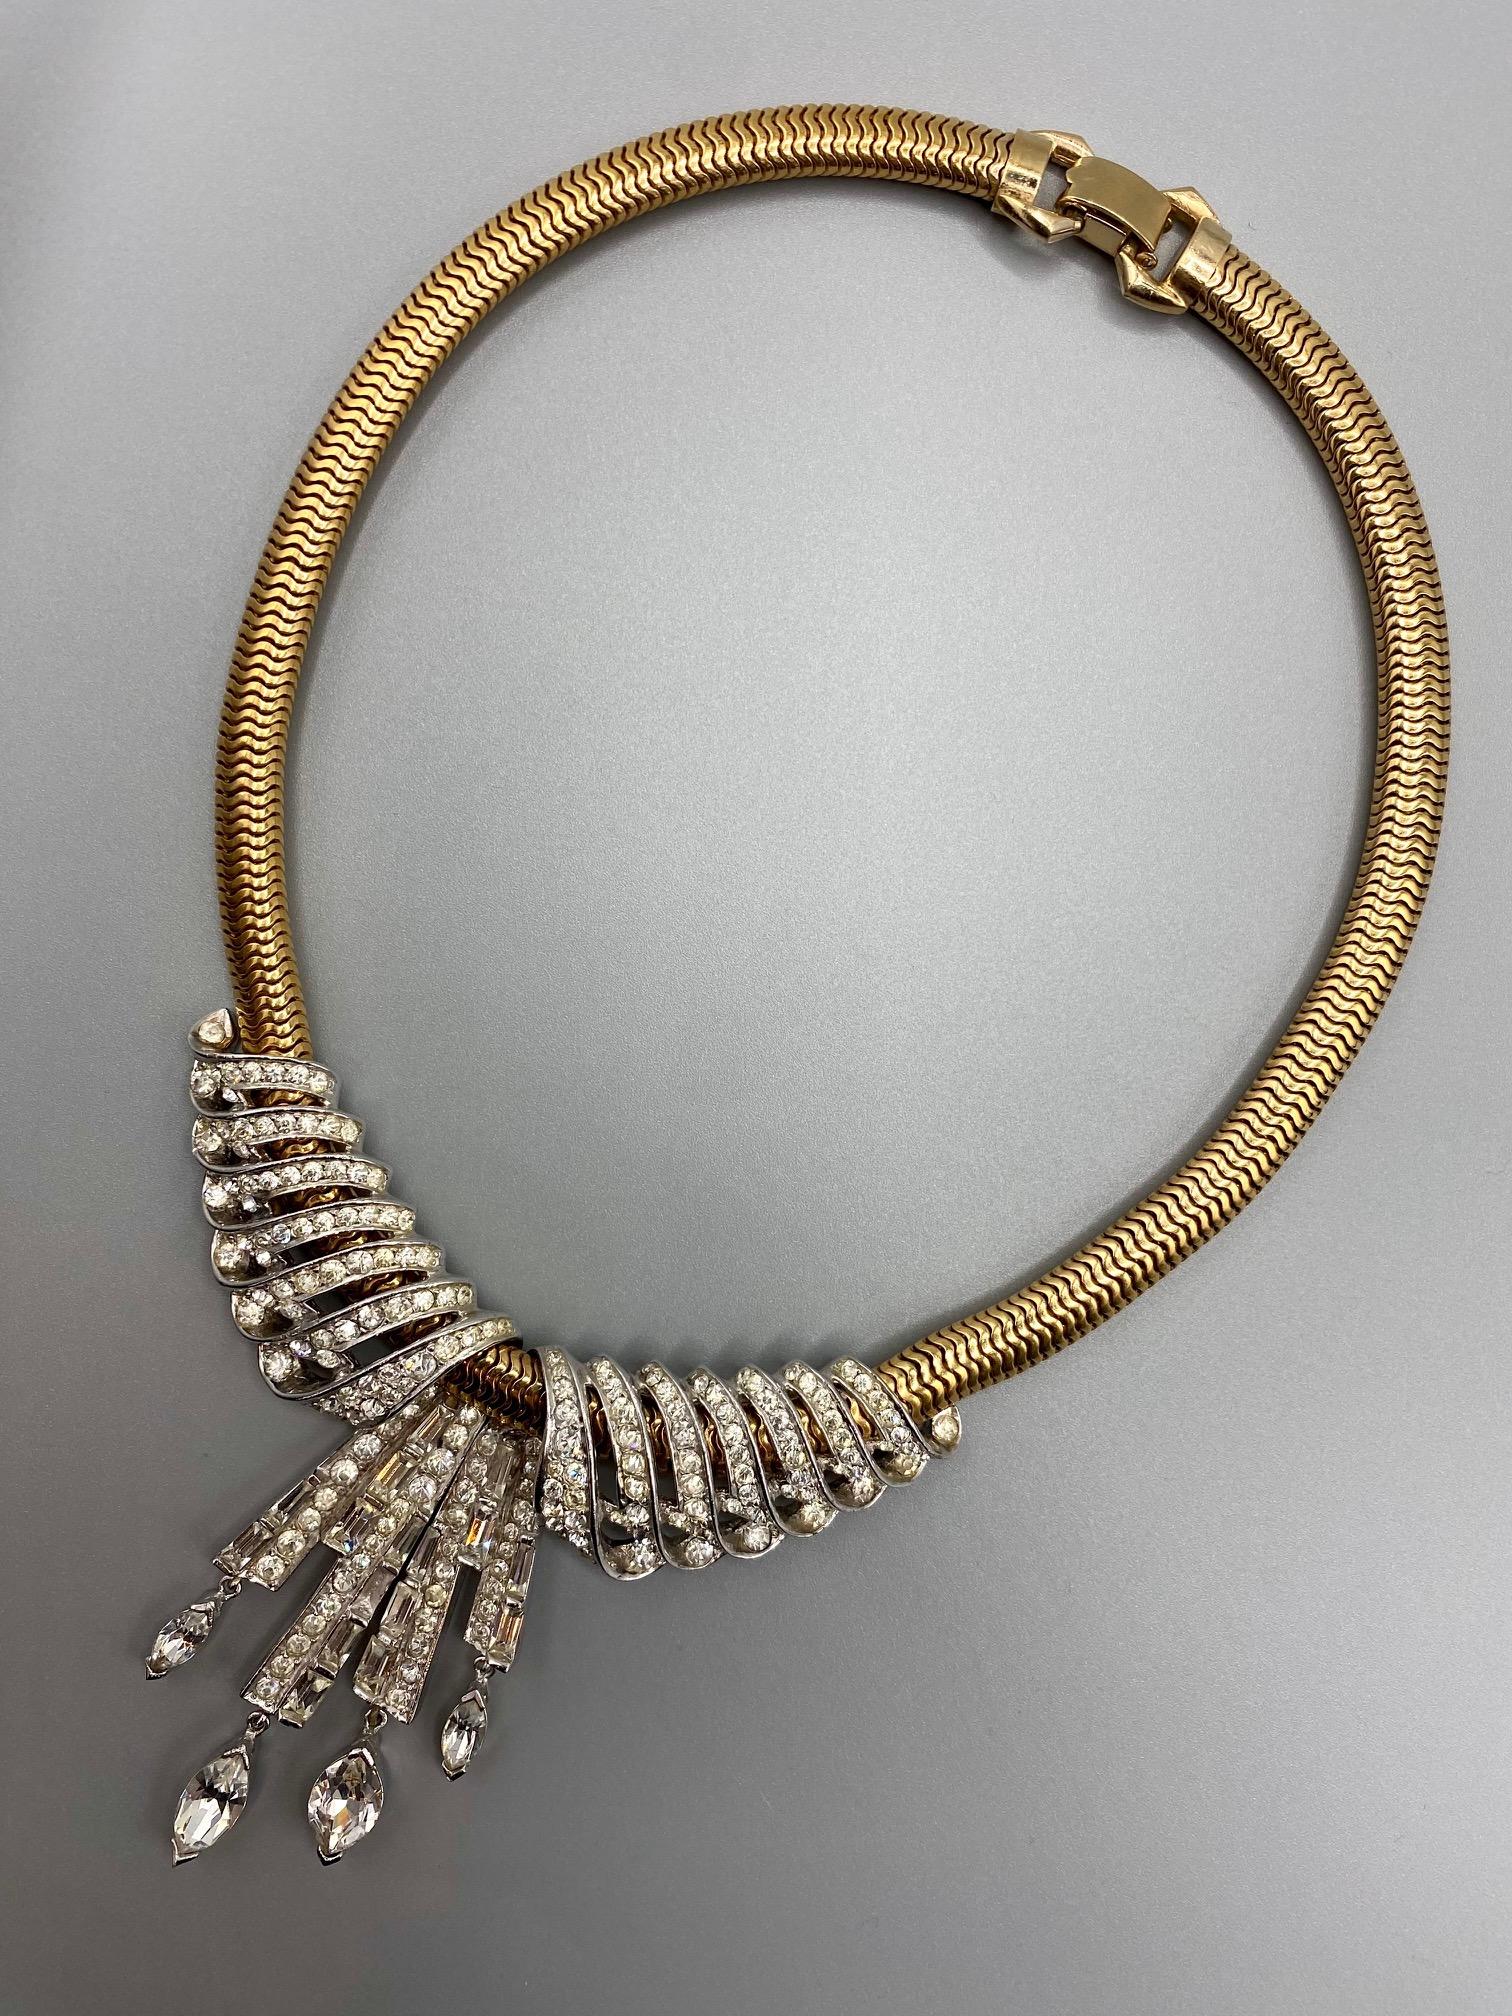 Presented is an elegant and eye catching vintage 1940s necklace by high end American fashion jewelry company Marcel Boucher. The necklace has a gold tone .25 inch wide and 15 inch long snake chain with fold over clasp in the back. The front has an